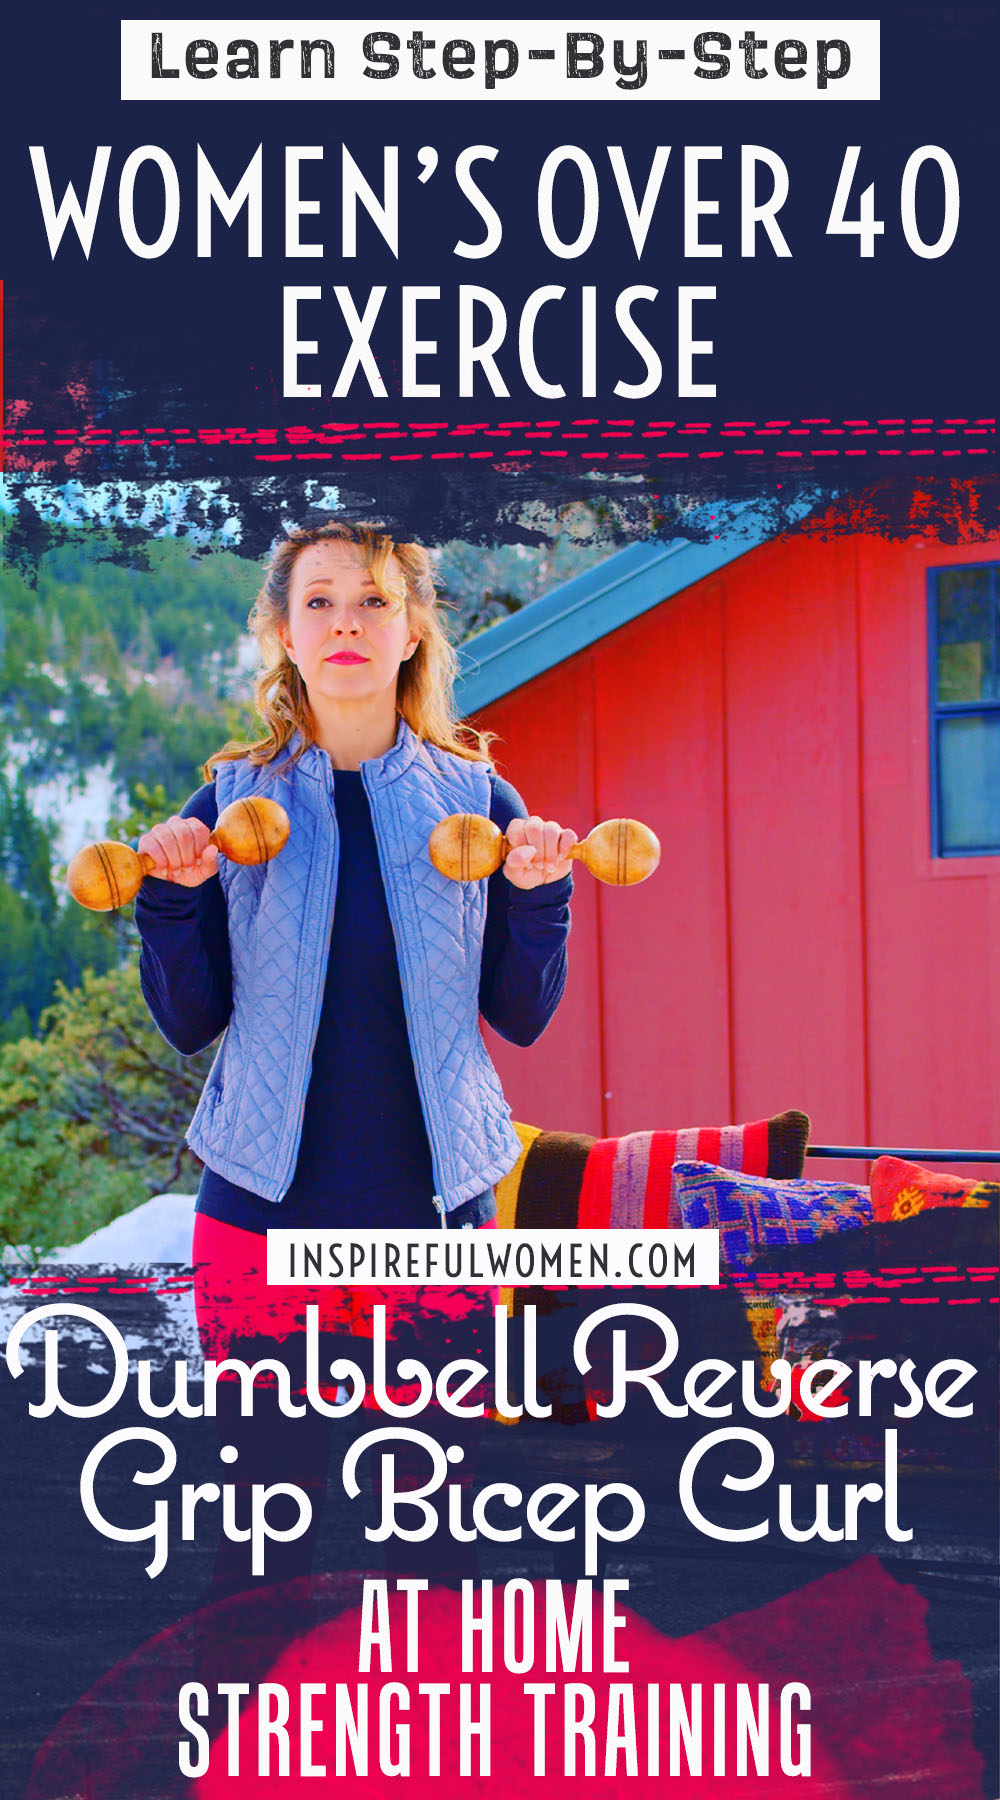 dumbbell-pronated-curl-bicep-exercise-workout-home-tutorial-womens-over-40